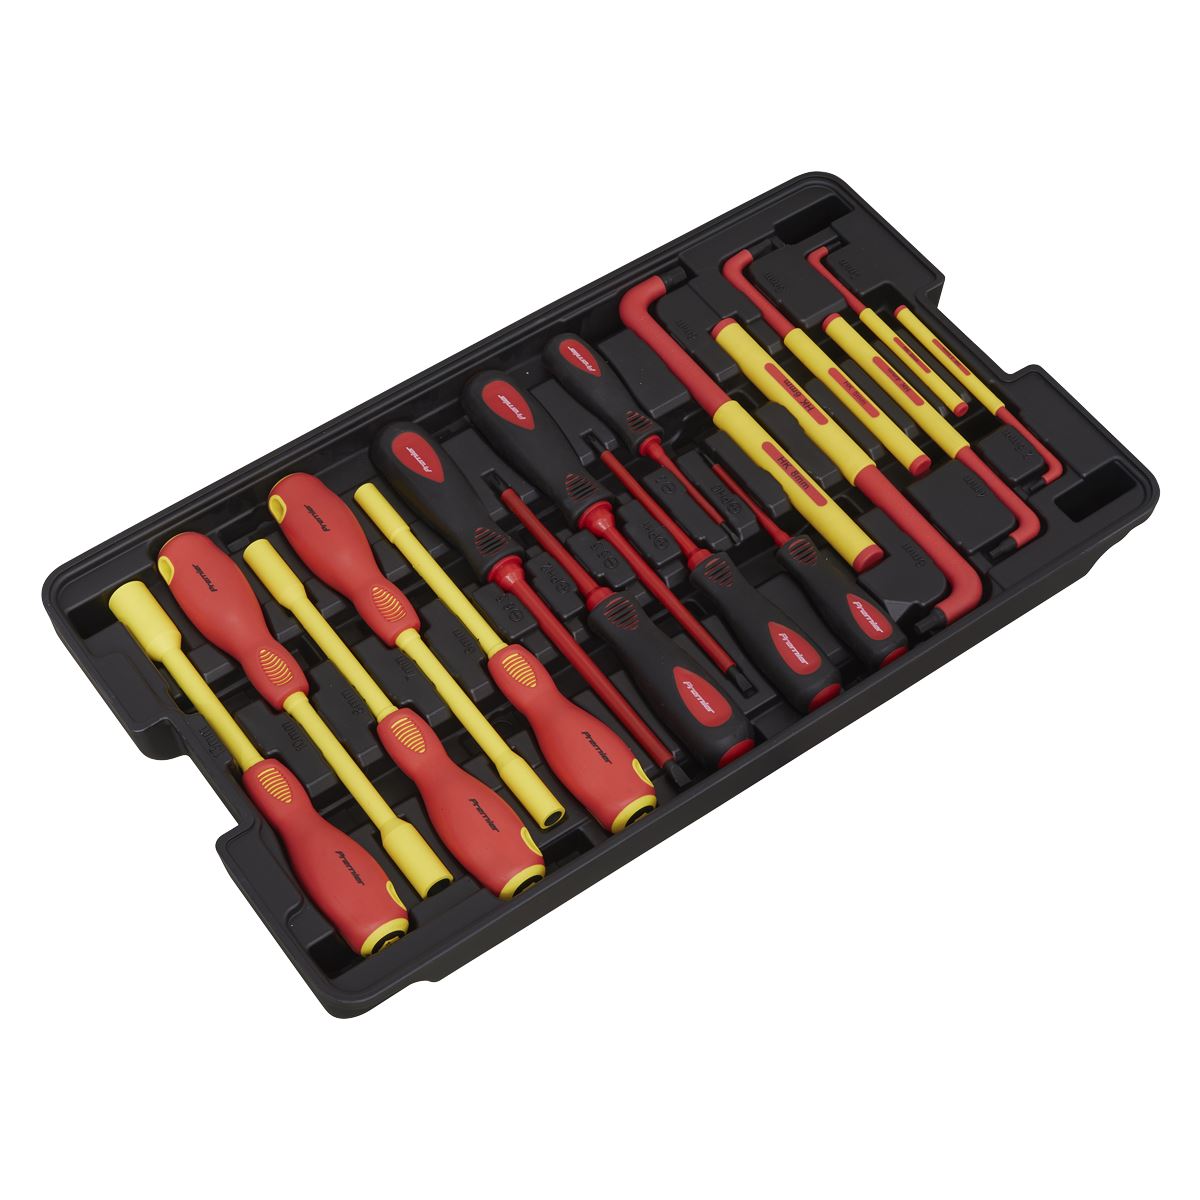 Sealey Premier 1000V Insulated Tool Kit 1/2"Sq Drive 49pc